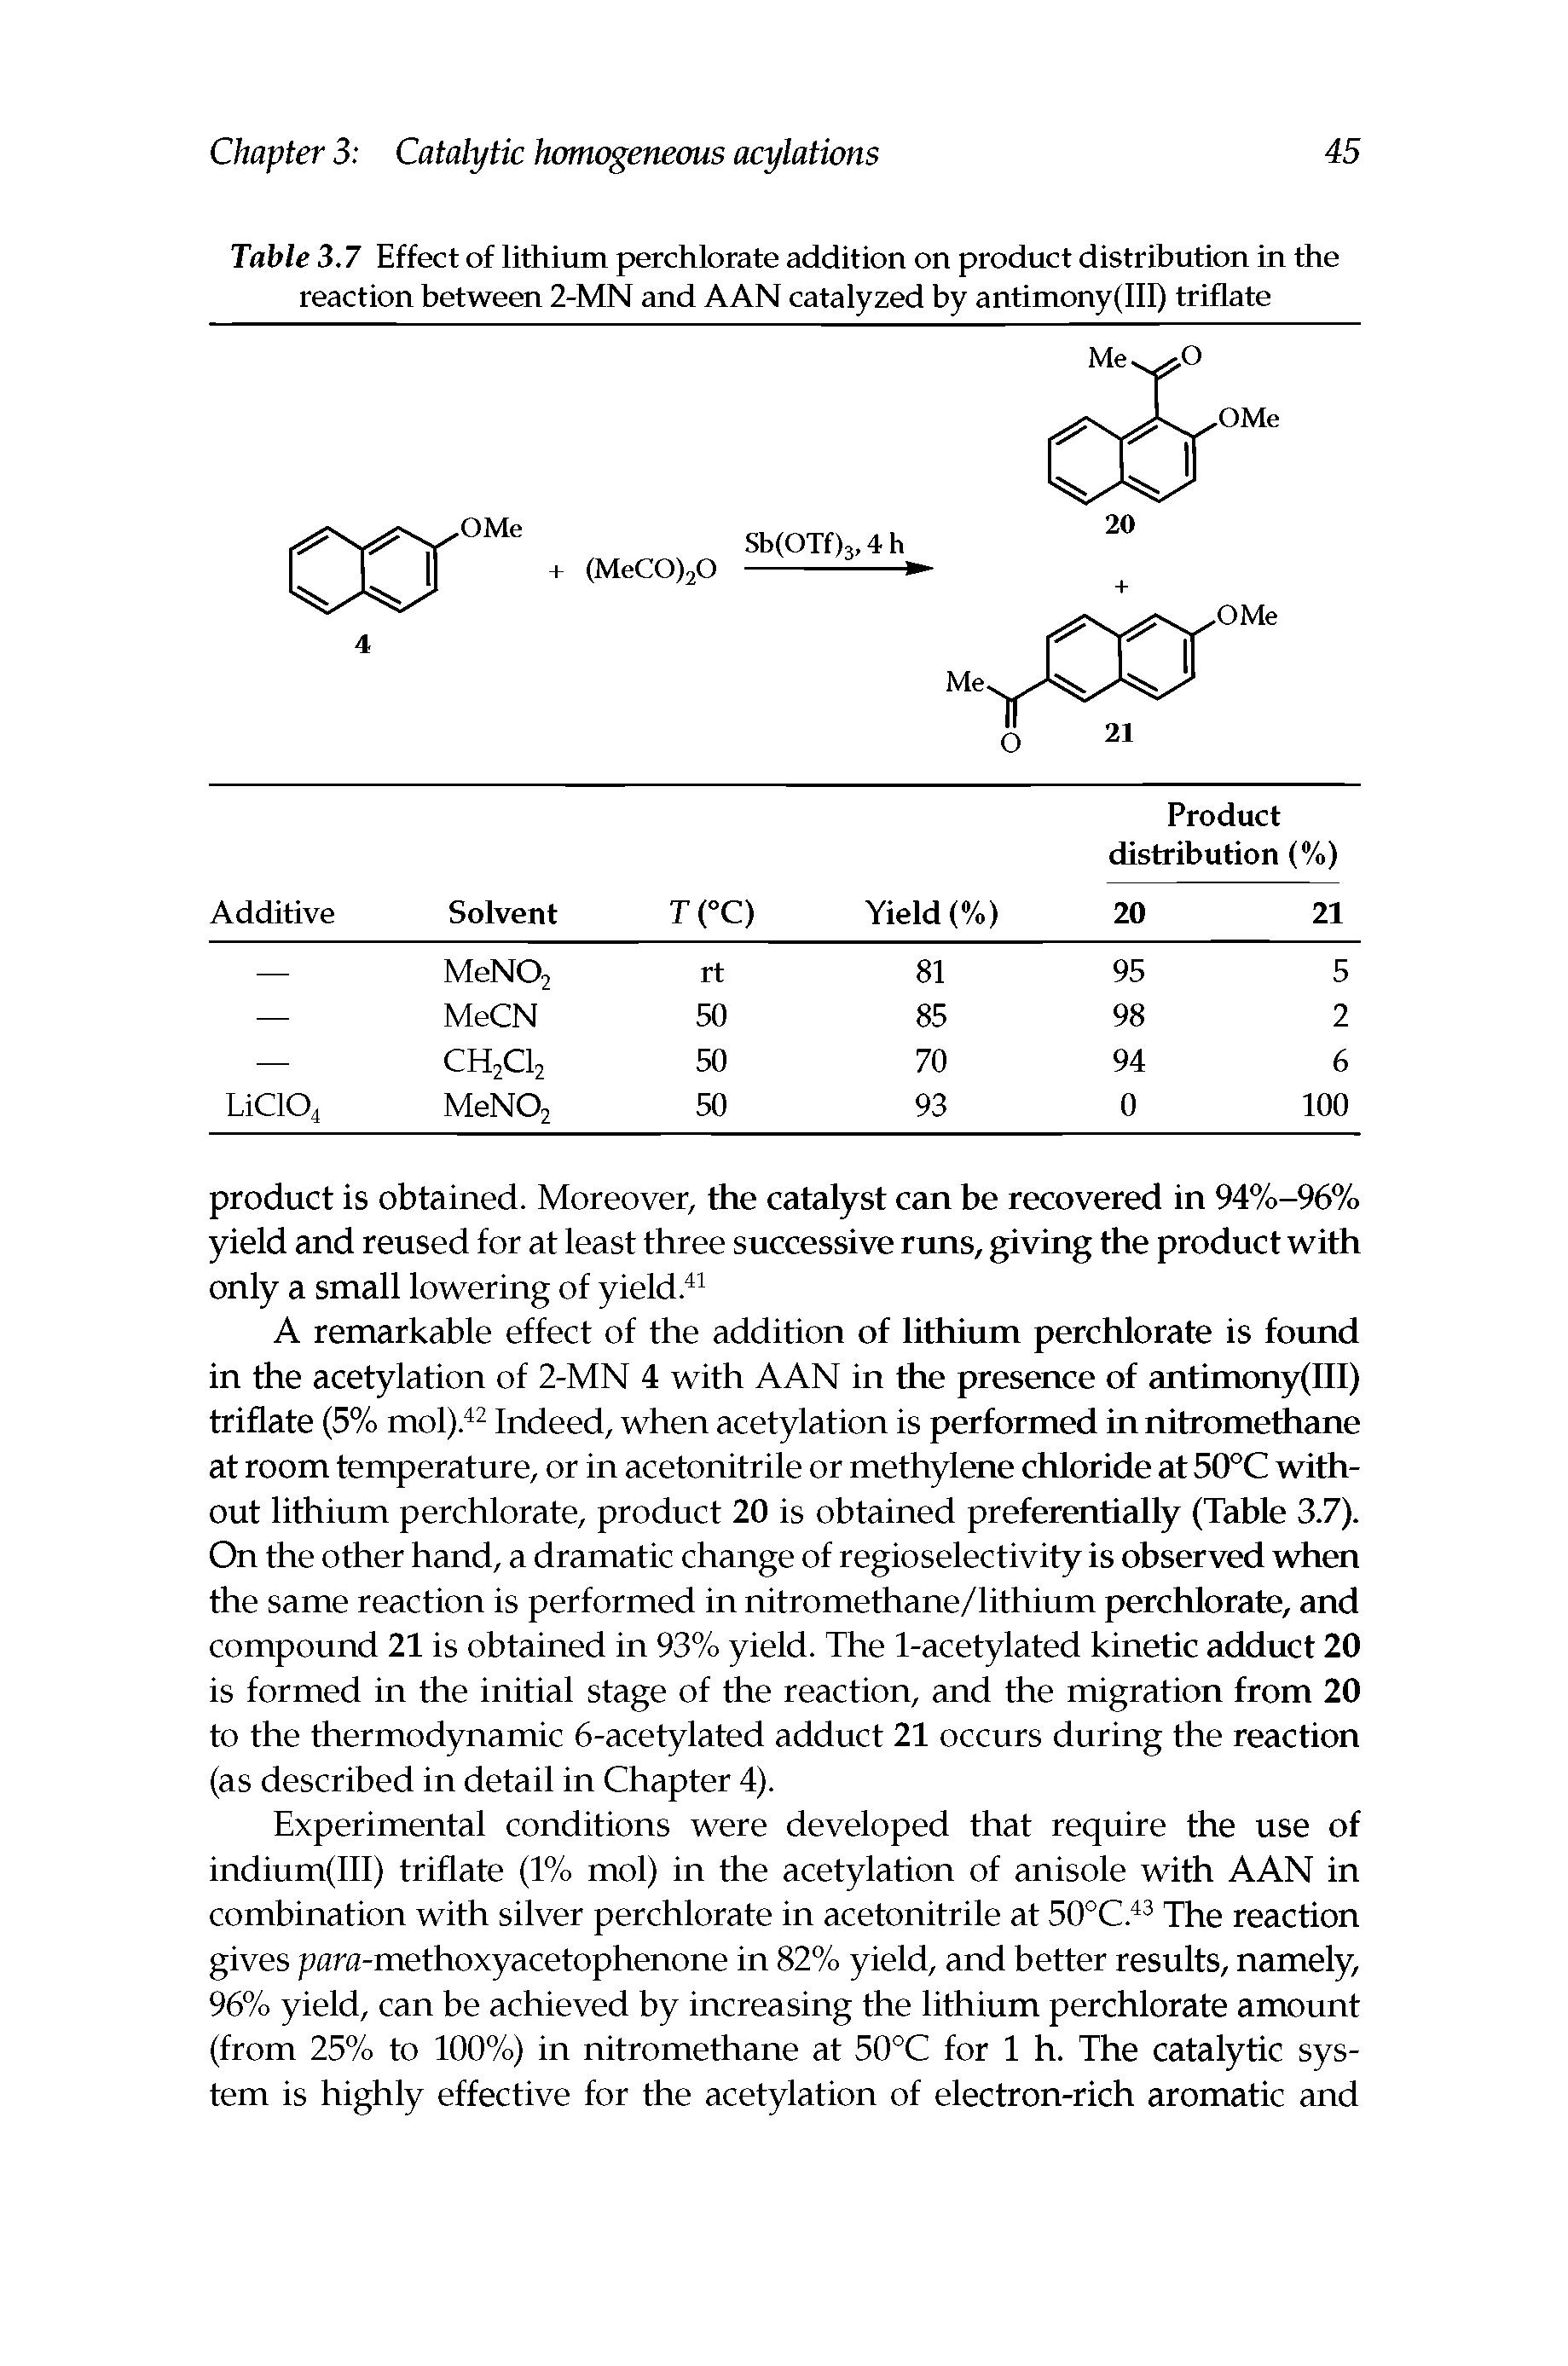 Table 3.7 Effect of lithium perchlorate addition on product distribution in the reaction between 2-MN and AAN catalyzed by antimony(lll) triflate...